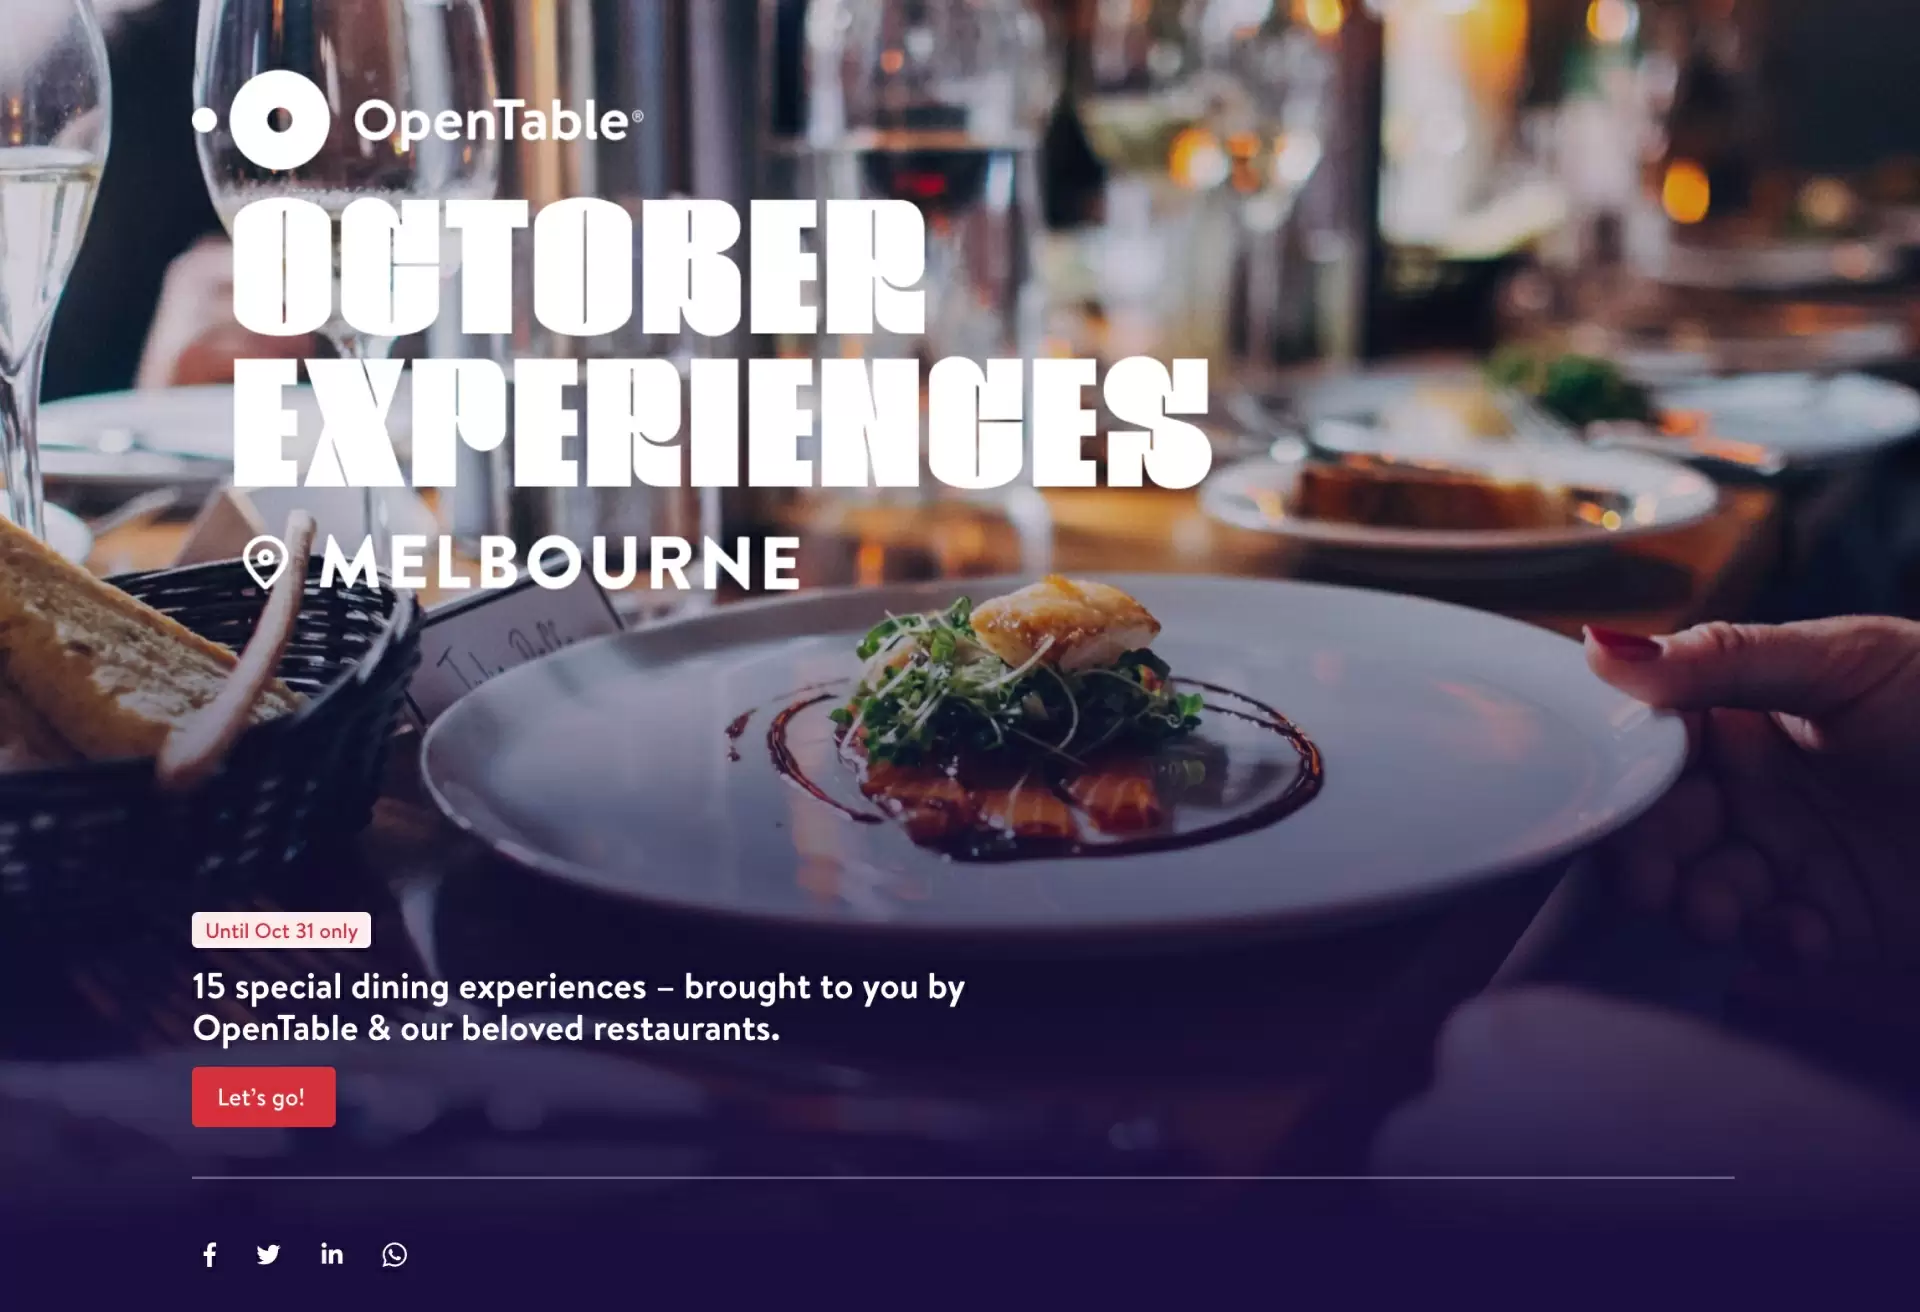 Best Restaurant Table Management Software in Australia, OpenTable, supports seamless reservations, requests, waitlist, and all rounded consumer marketing for restaurants to attract diners.